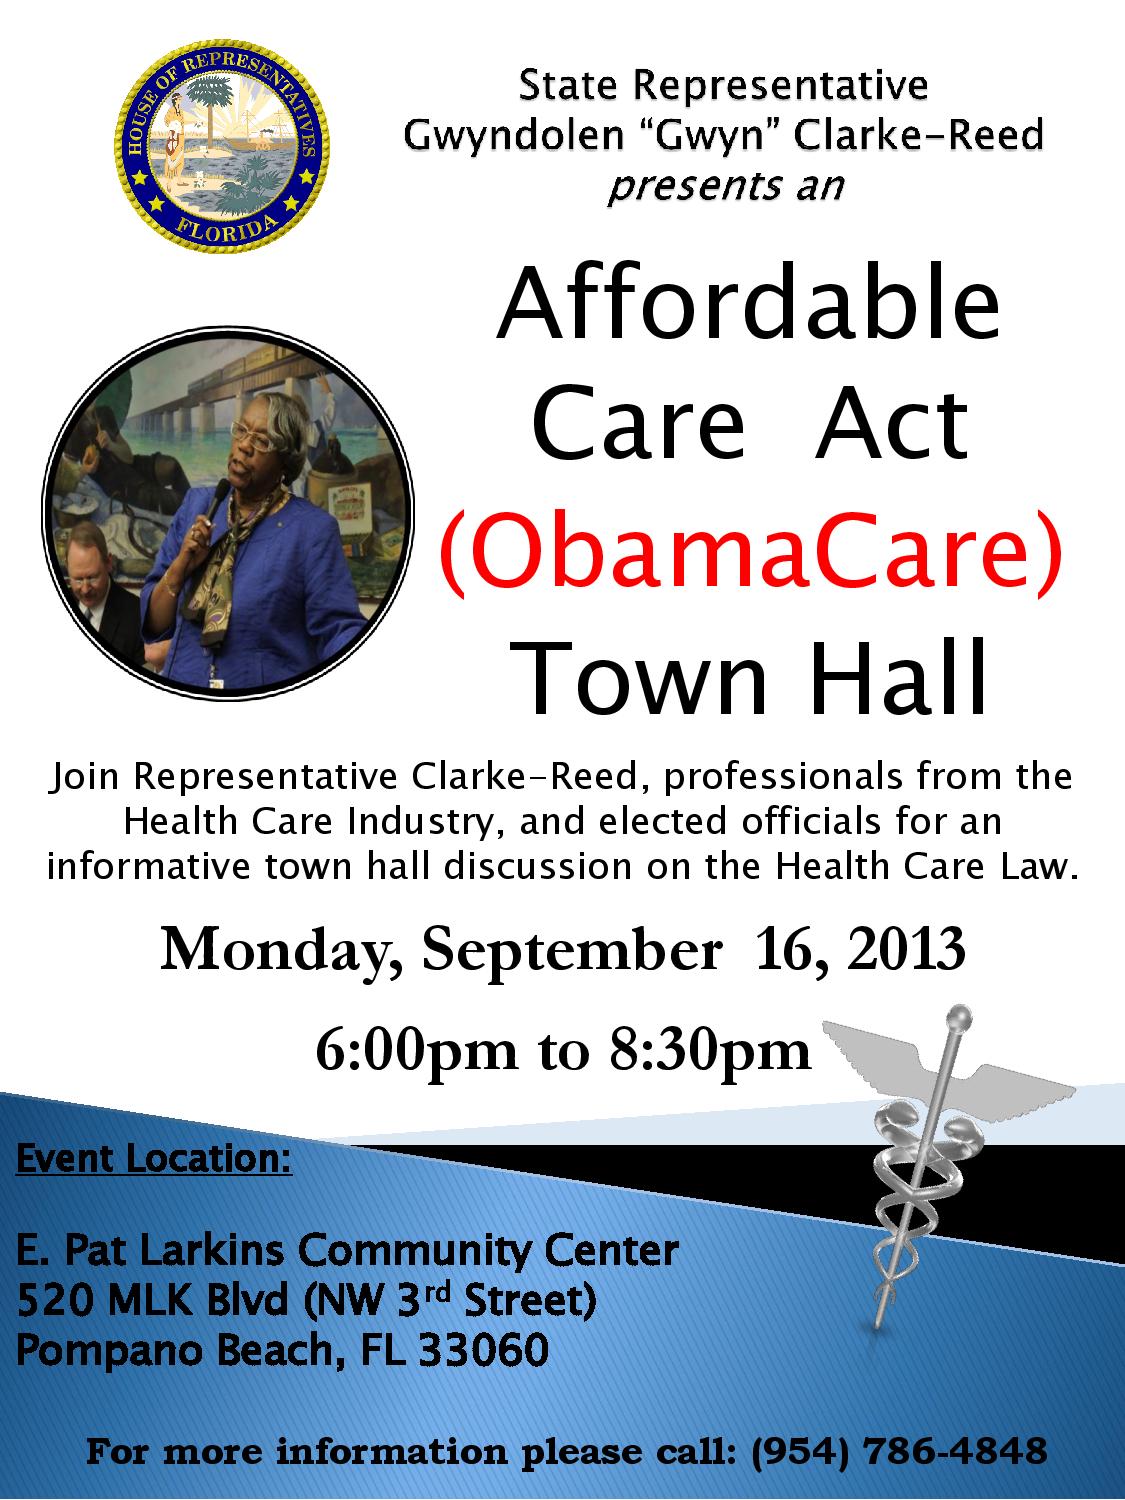 Affordable Care Act (ObamaCare) Town Hall - The Westside Gazette